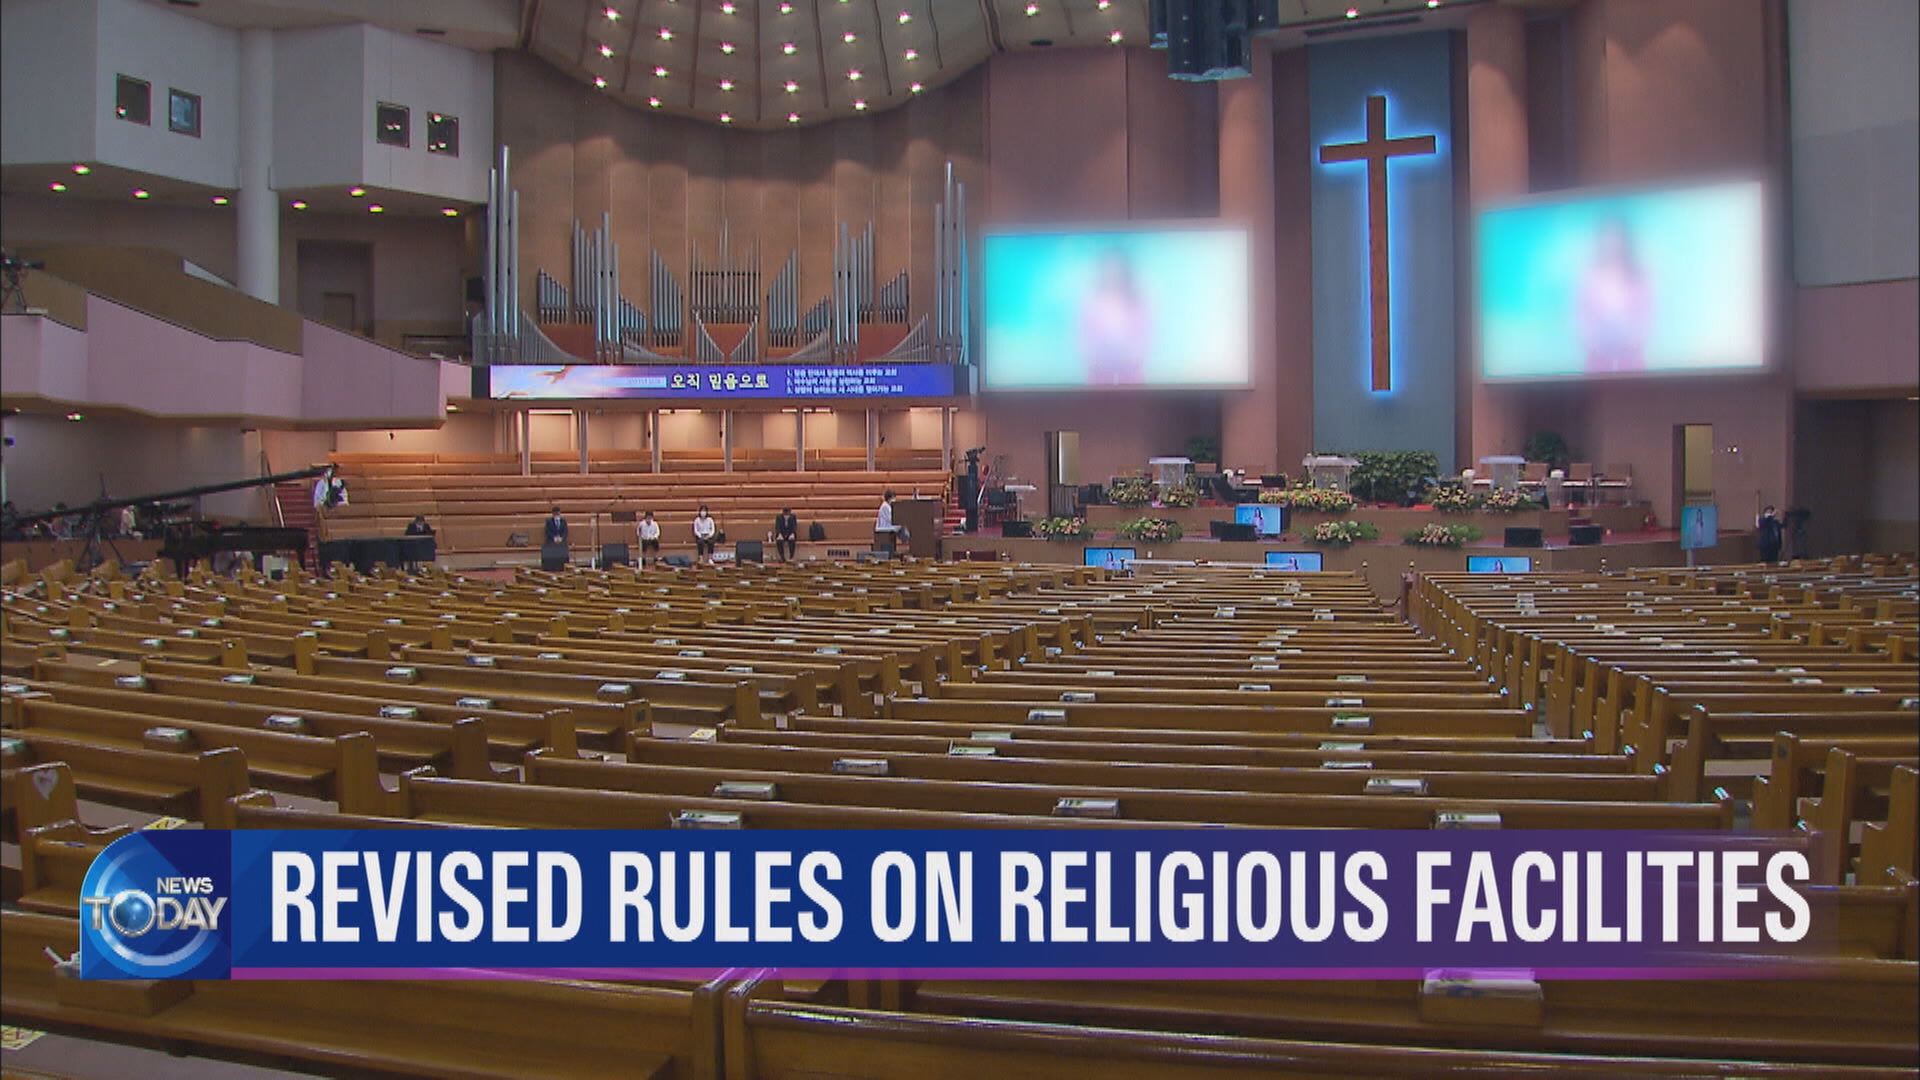 REVISED RULES ON RELIGIOUS FACILITIES